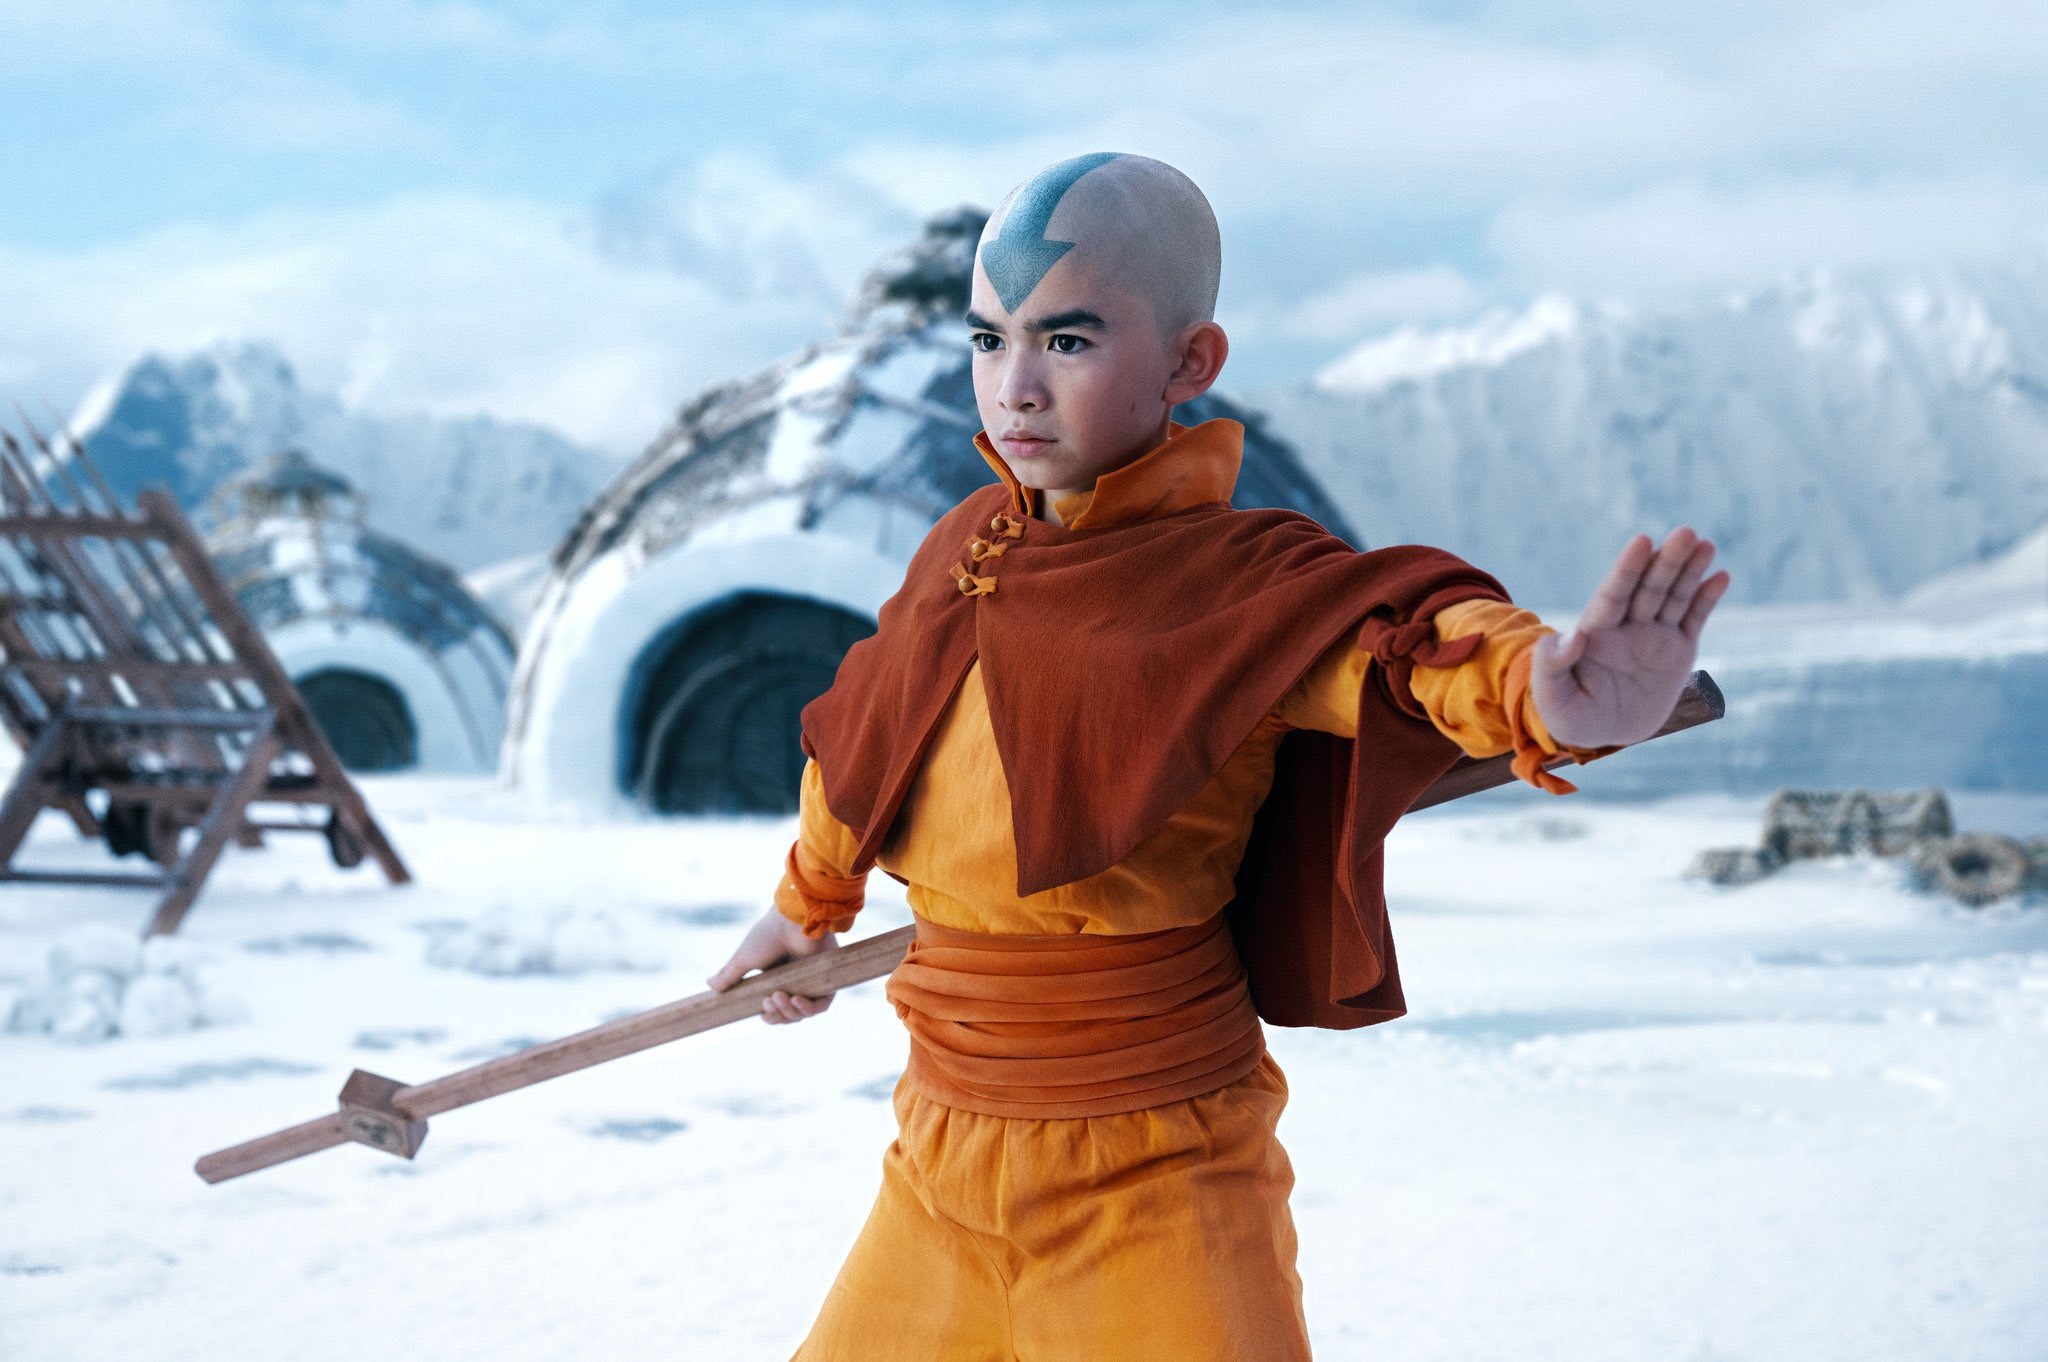 #Avatar: The Last Airbender: Seasons Two and Three Renewal; Netflix Live-Action Series to Conclude